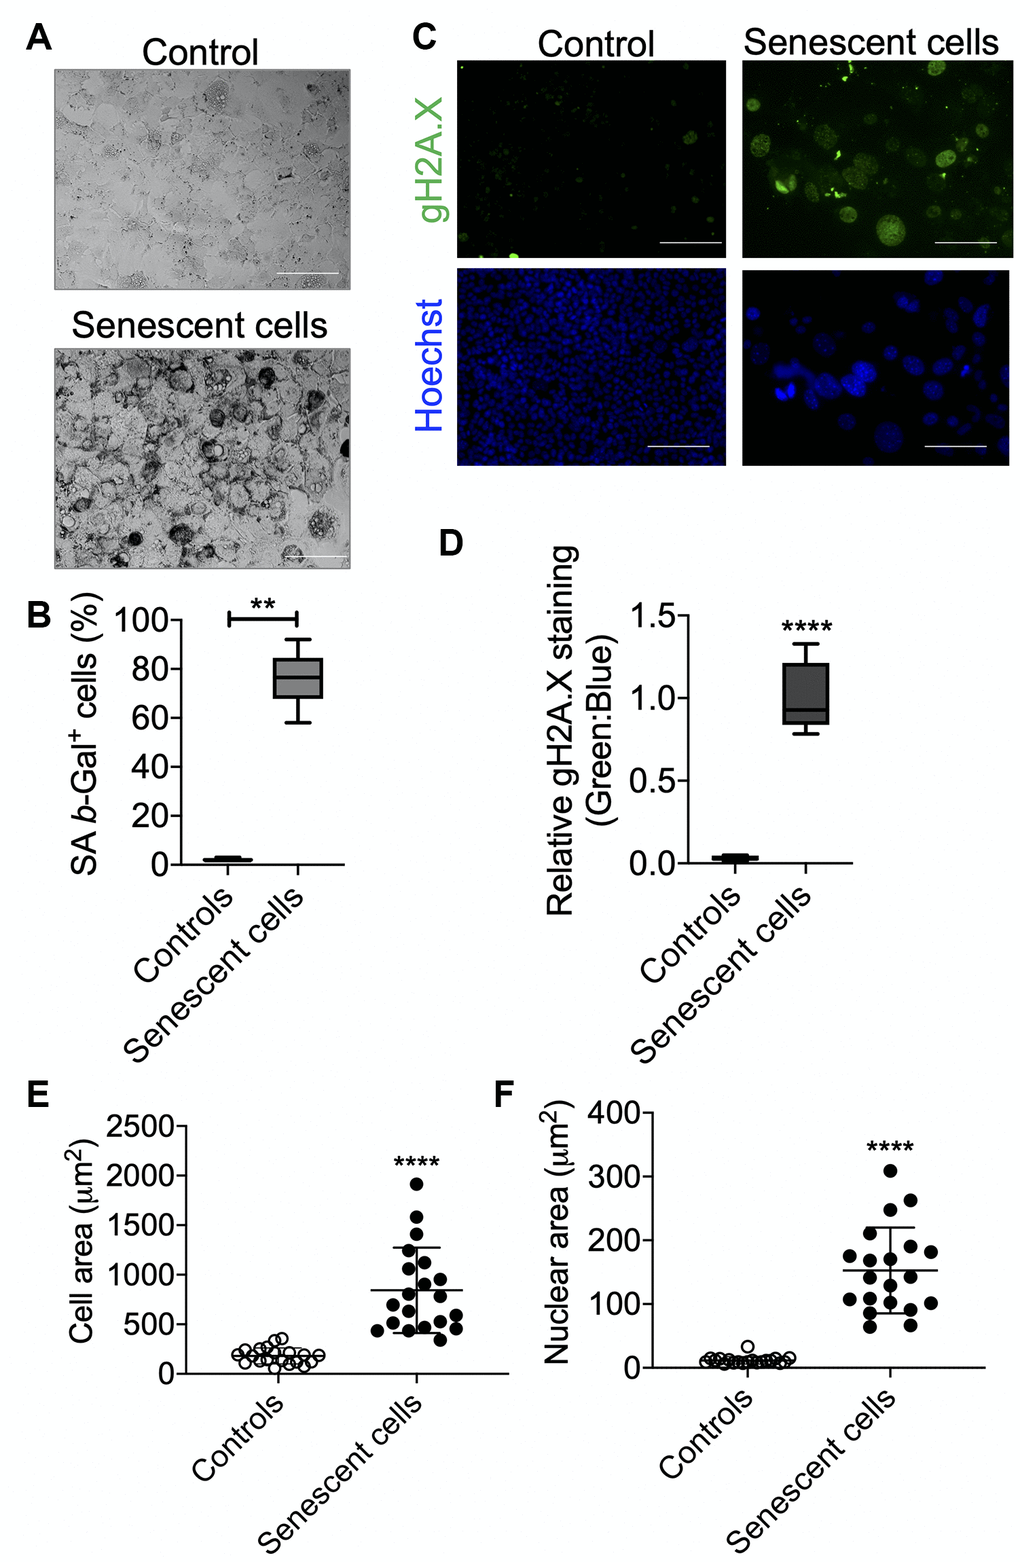 Senescence validation by SA β-Gal and γH2A.X staining. After senescence induction at day 7, cells were re-seeded in 4-chambered slides and next day SA β-Gal (A) and γH2A.X (B) staining were performed. Cells were counted manually for analyzing SA β-Gal+ cells over total cells and presented as percent positive cells. Scale bars as 50 μm. (C) Cells were counter-stained with Hoechst 33324 for immunofluorescence imaging and relative γH2A.X signals were analyzed over Hoechst 33324 signals. Scale bars as 100 μm. (D). (E and F). Area of the cells (E) and nucleus (F) were measured using ImageJ (NIH) software. Statistical differences were calculated significant as *p